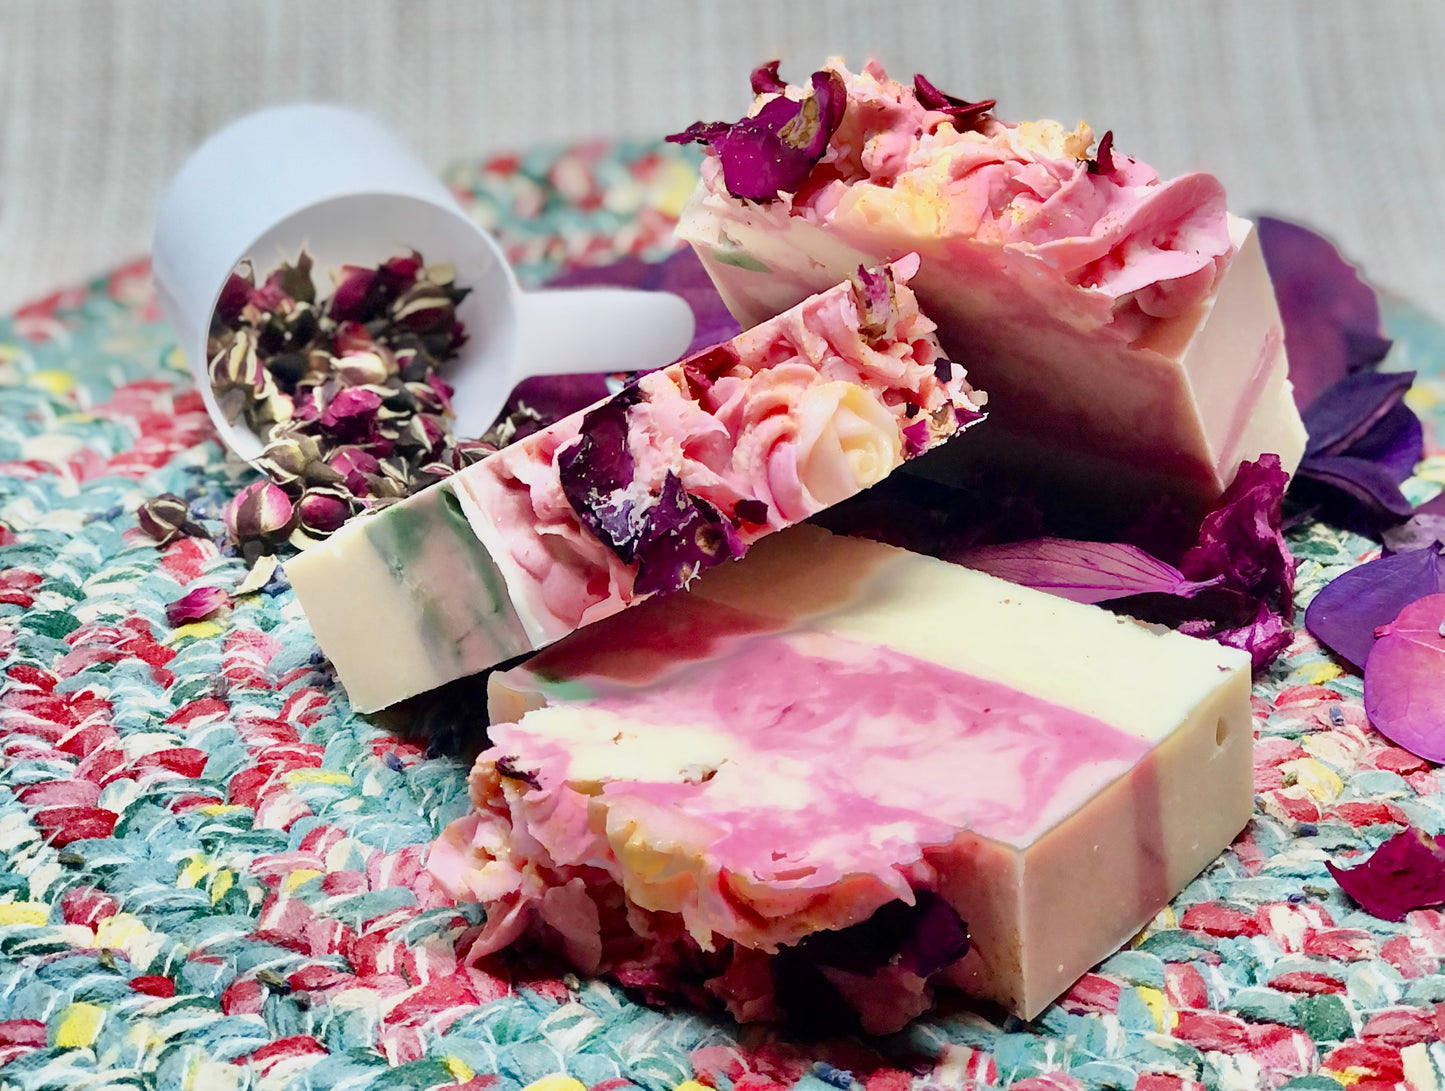 Rose Petals Soap/Bath, flower, local,bar soap, gentle soap,artisan soap homemade soap, fun soap, handcrafted soap, gift, wedding, creamy lather, bubbly, party,vegan, floral,natural, gourgeous, beauty, luxurious